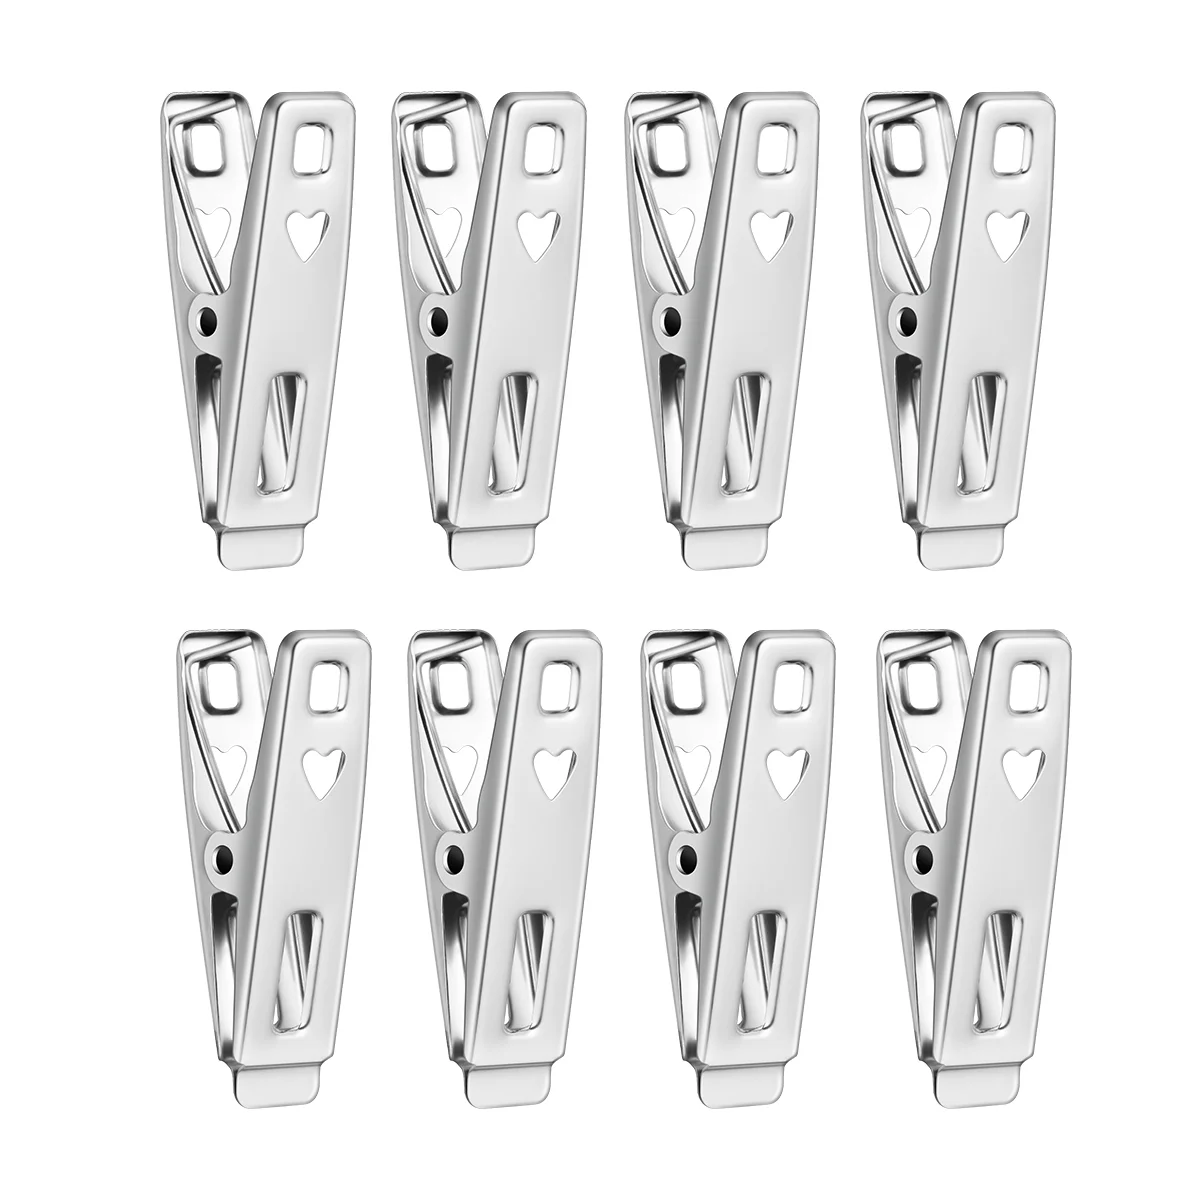 

40pcs Metal Clothespin Multi- Clothes Utility Clips for Laundry, Kitchen, Backyard, Outdoor Clothes Drying, Chip Clothesline